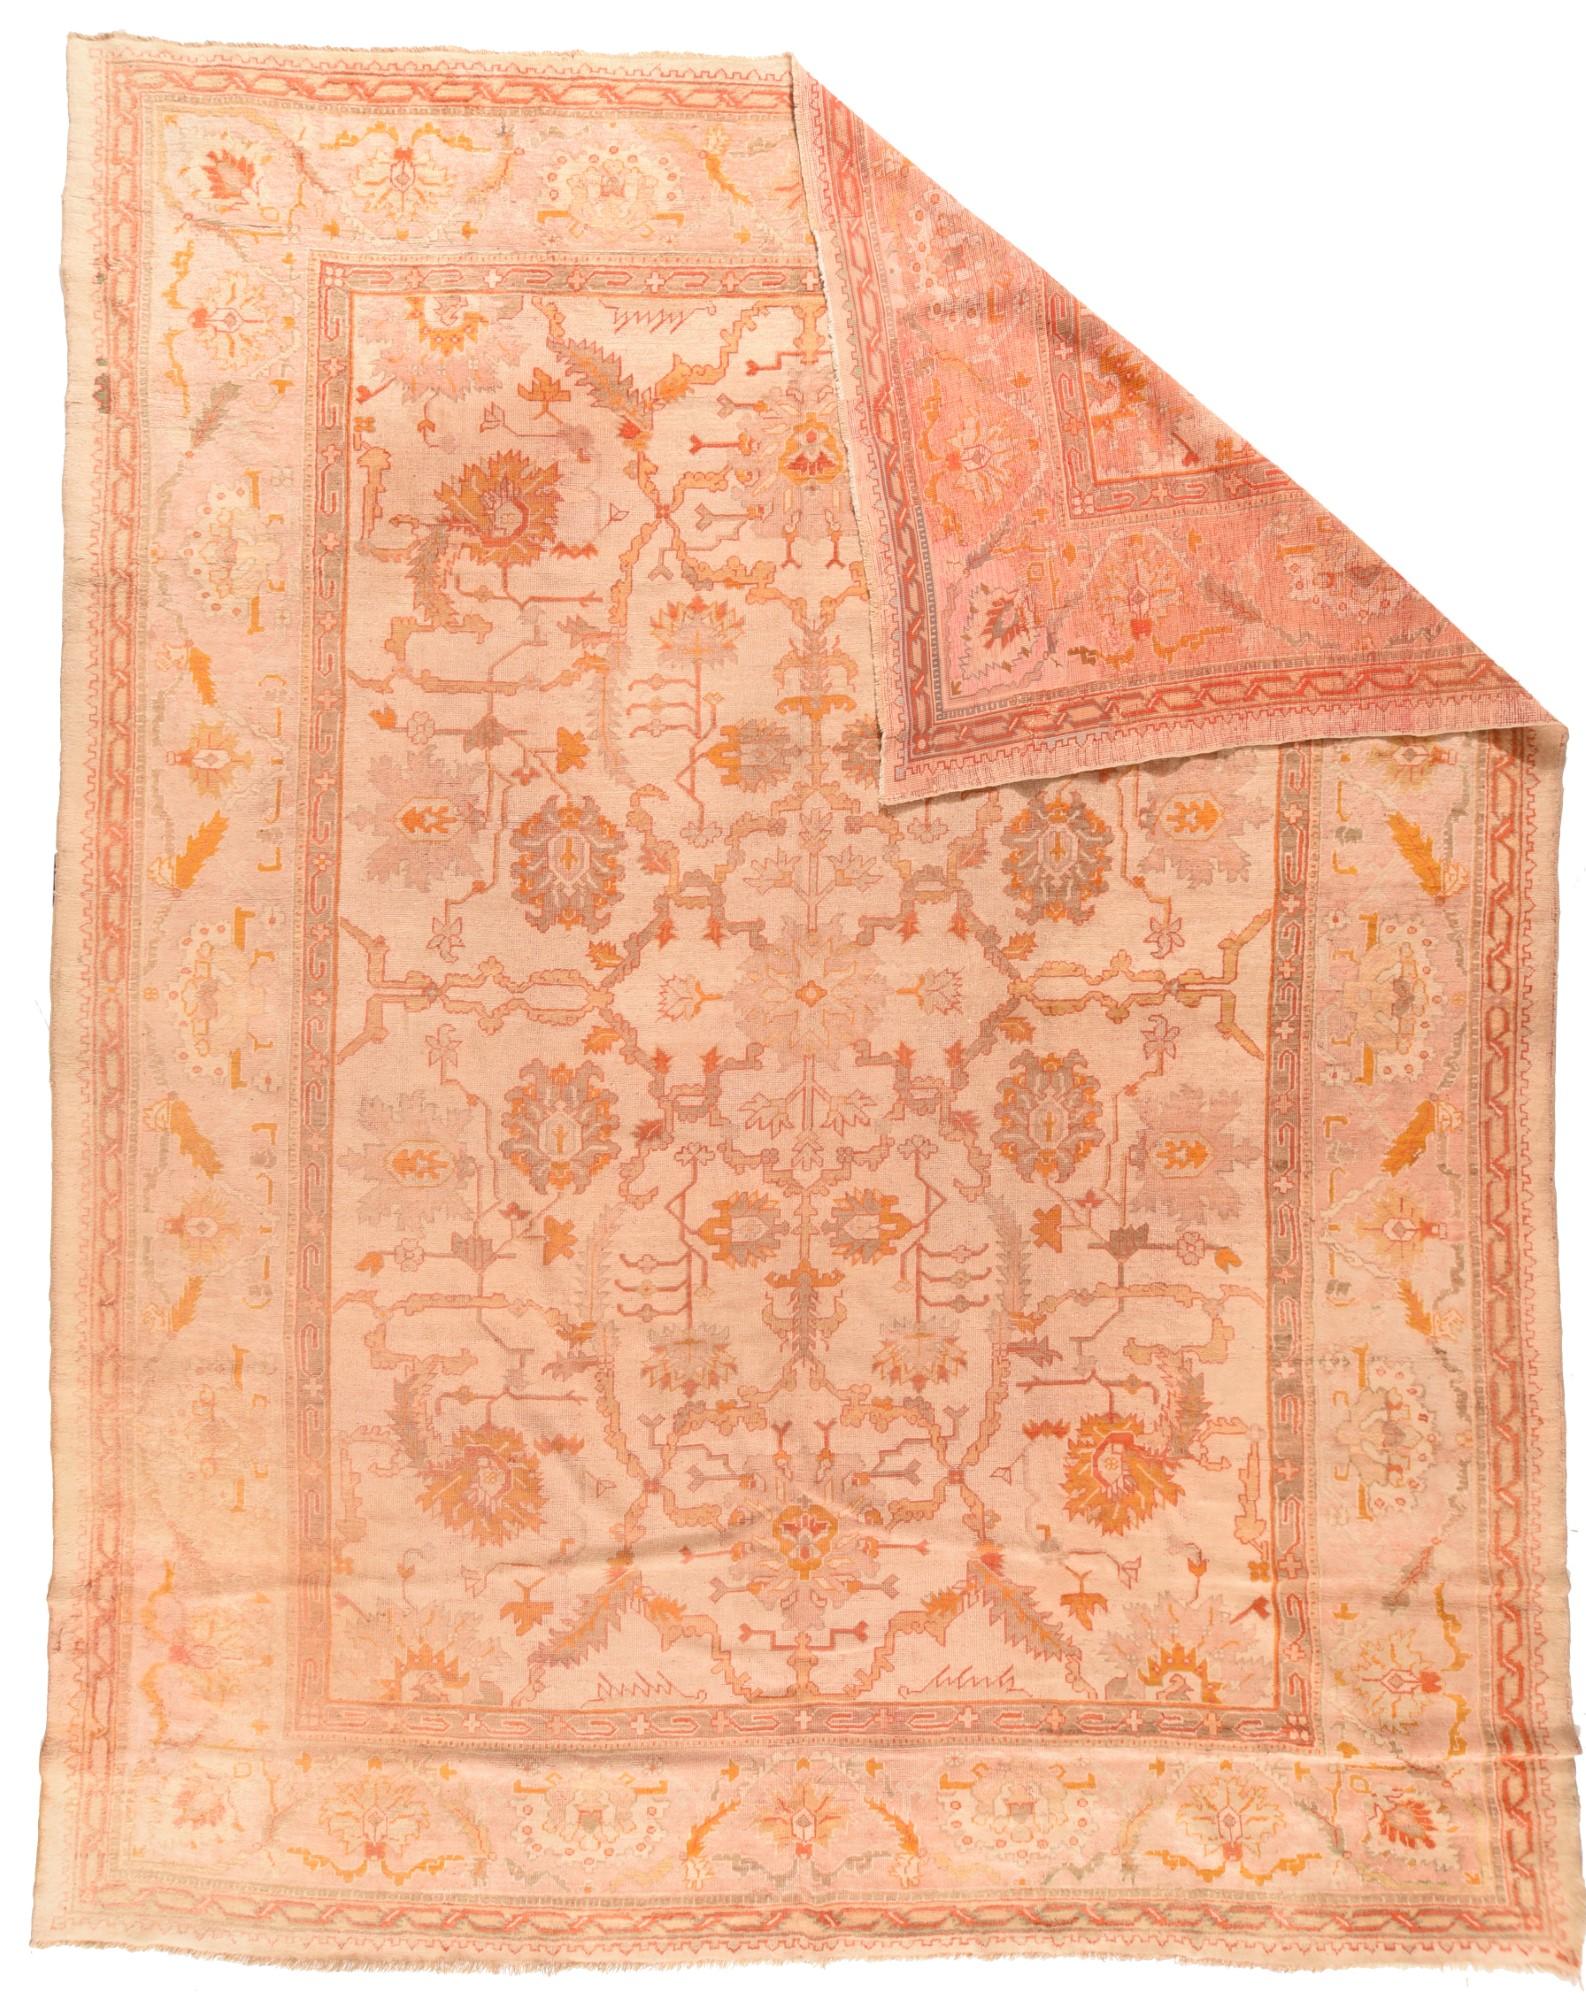 Antique Turkish Oushak rug meassures 11'4'' x 14'4''. The cream-straw field shows eight goldenrod petal palmettes controlling an arabesque, teem and leaf pattern vaguely reminiscent of classic 